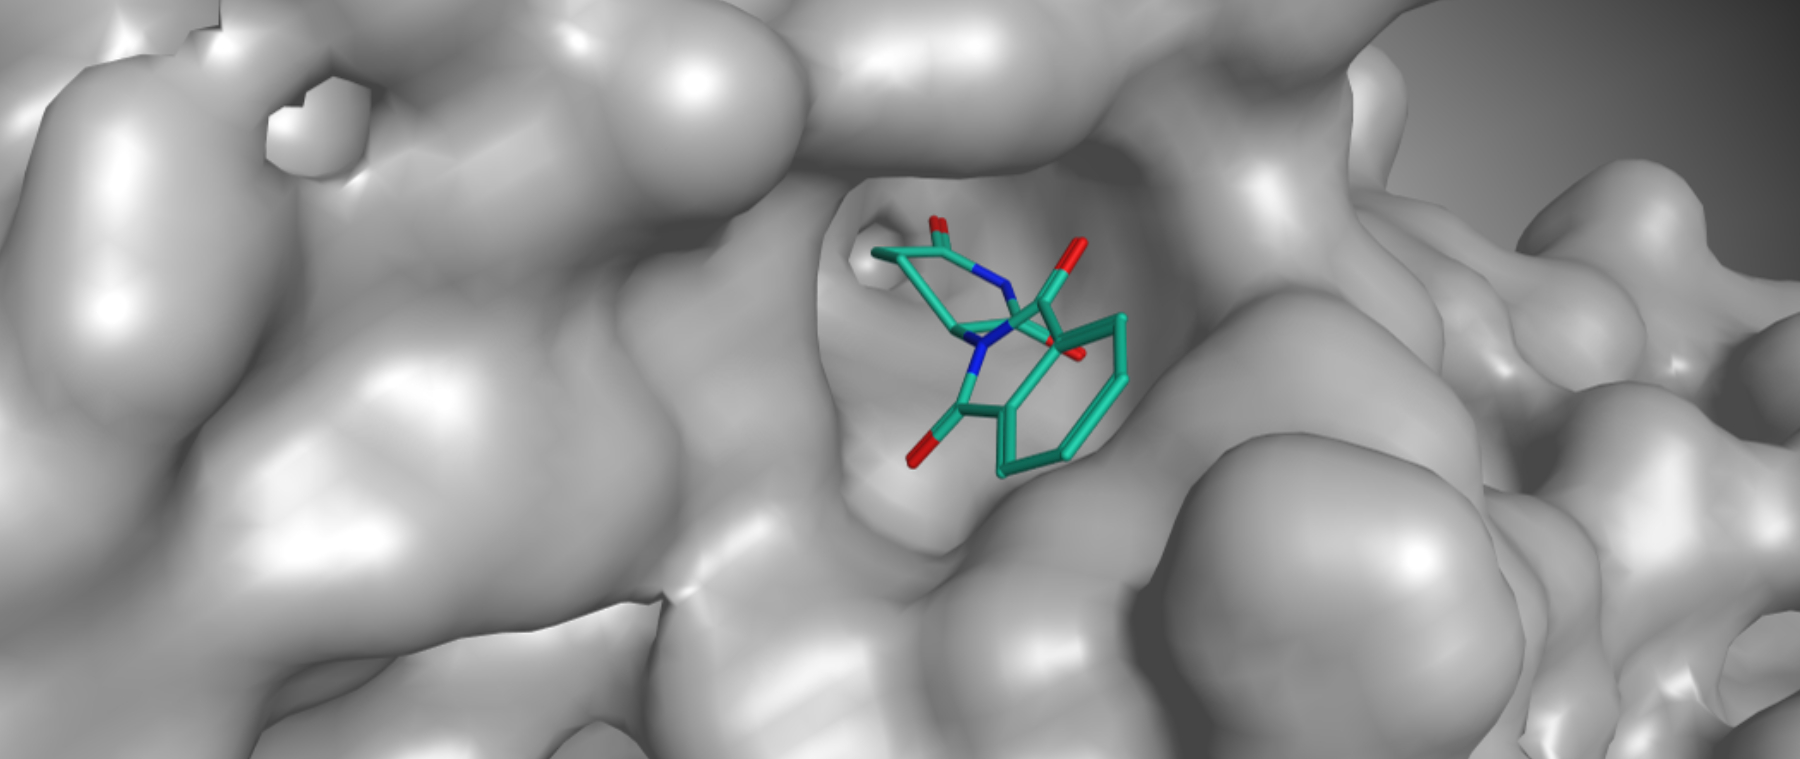 The graph shows how thalidomide attaches itself to the protein molecule Cereblon.